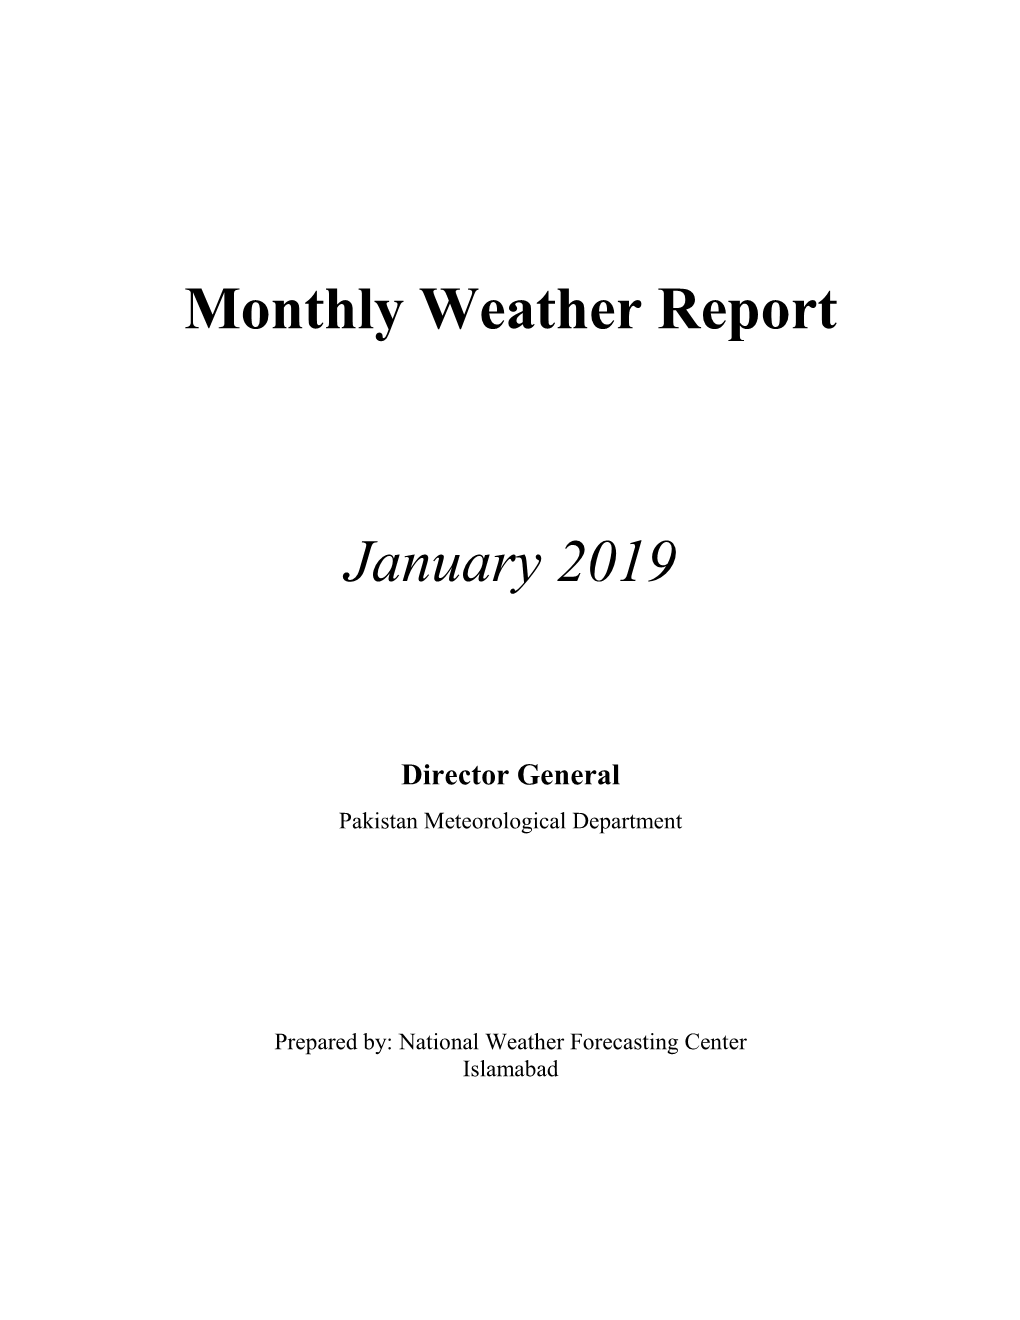 Monthly Weather Report January 2019